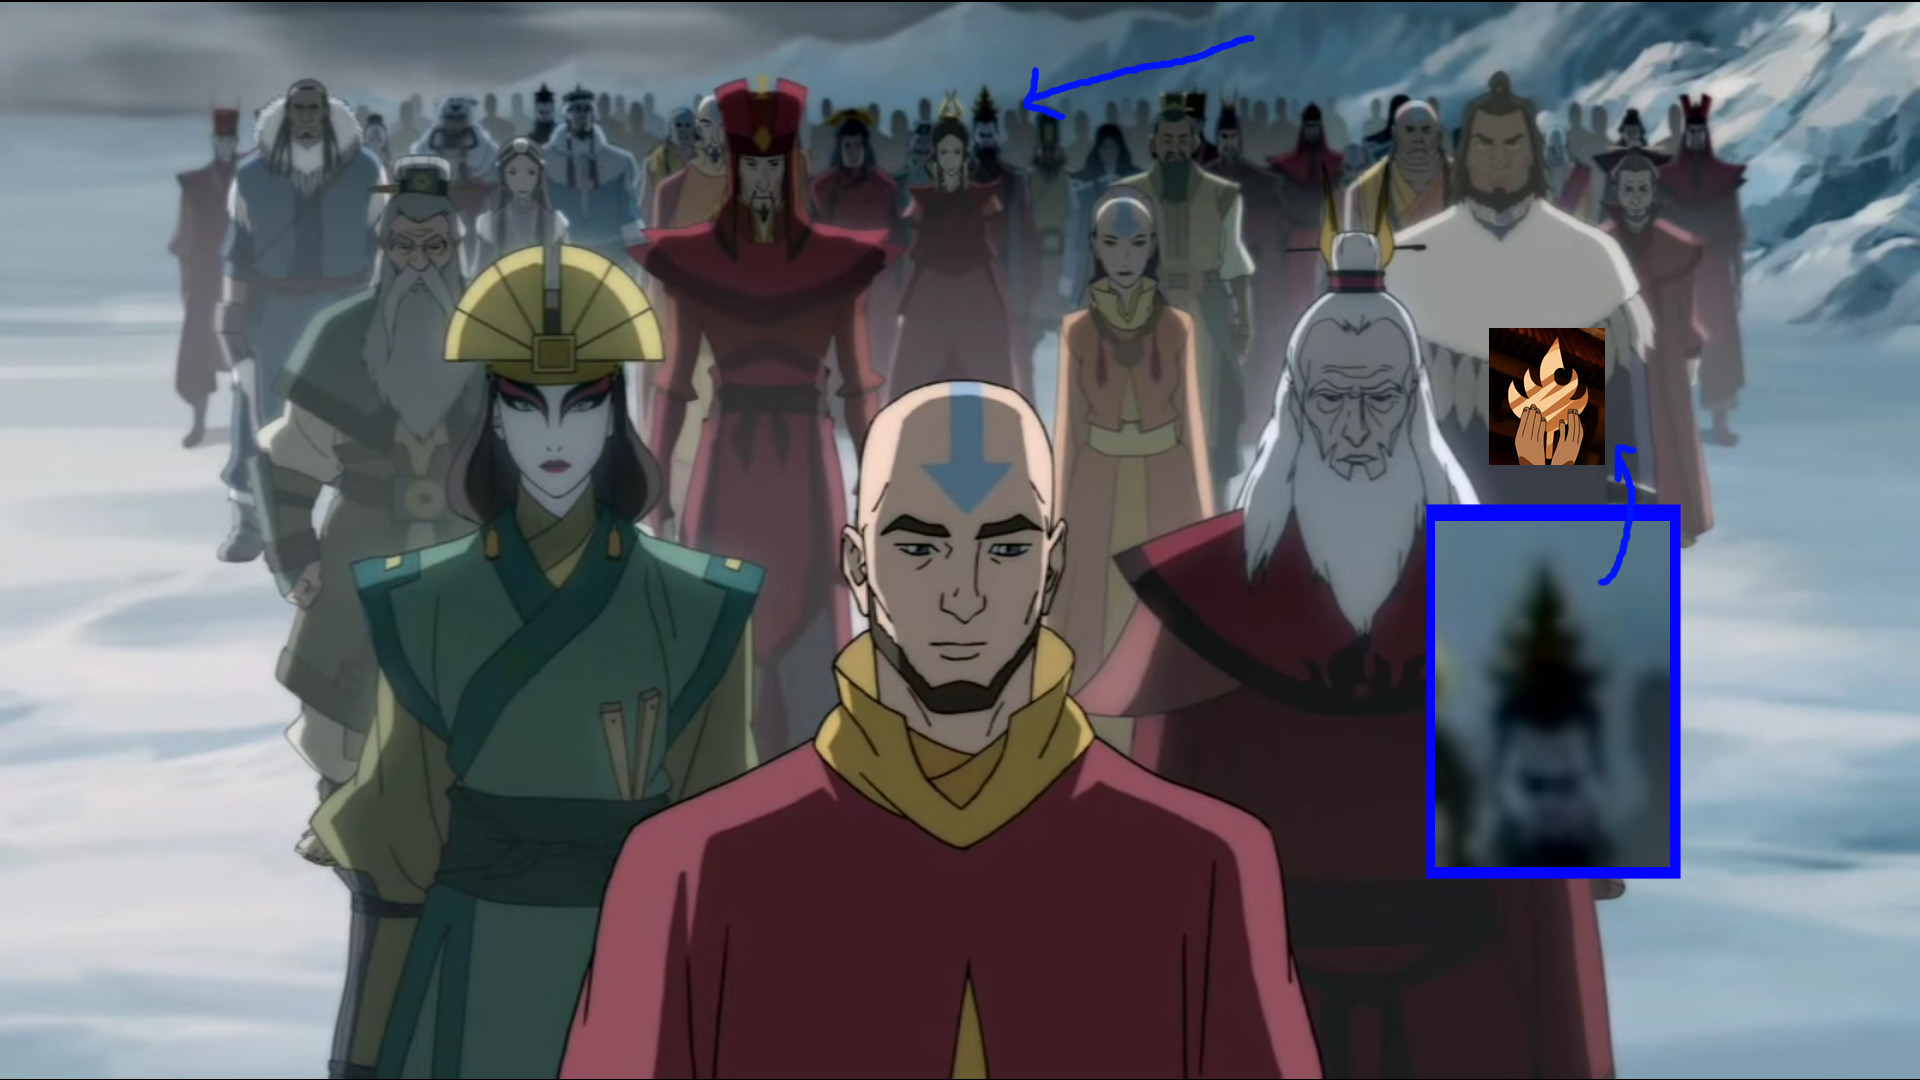 No Spoilers One Of The Previous Avatars Was A Firelord This Means Zuko Has 2 Avatars In His Family Tree 1920x1080